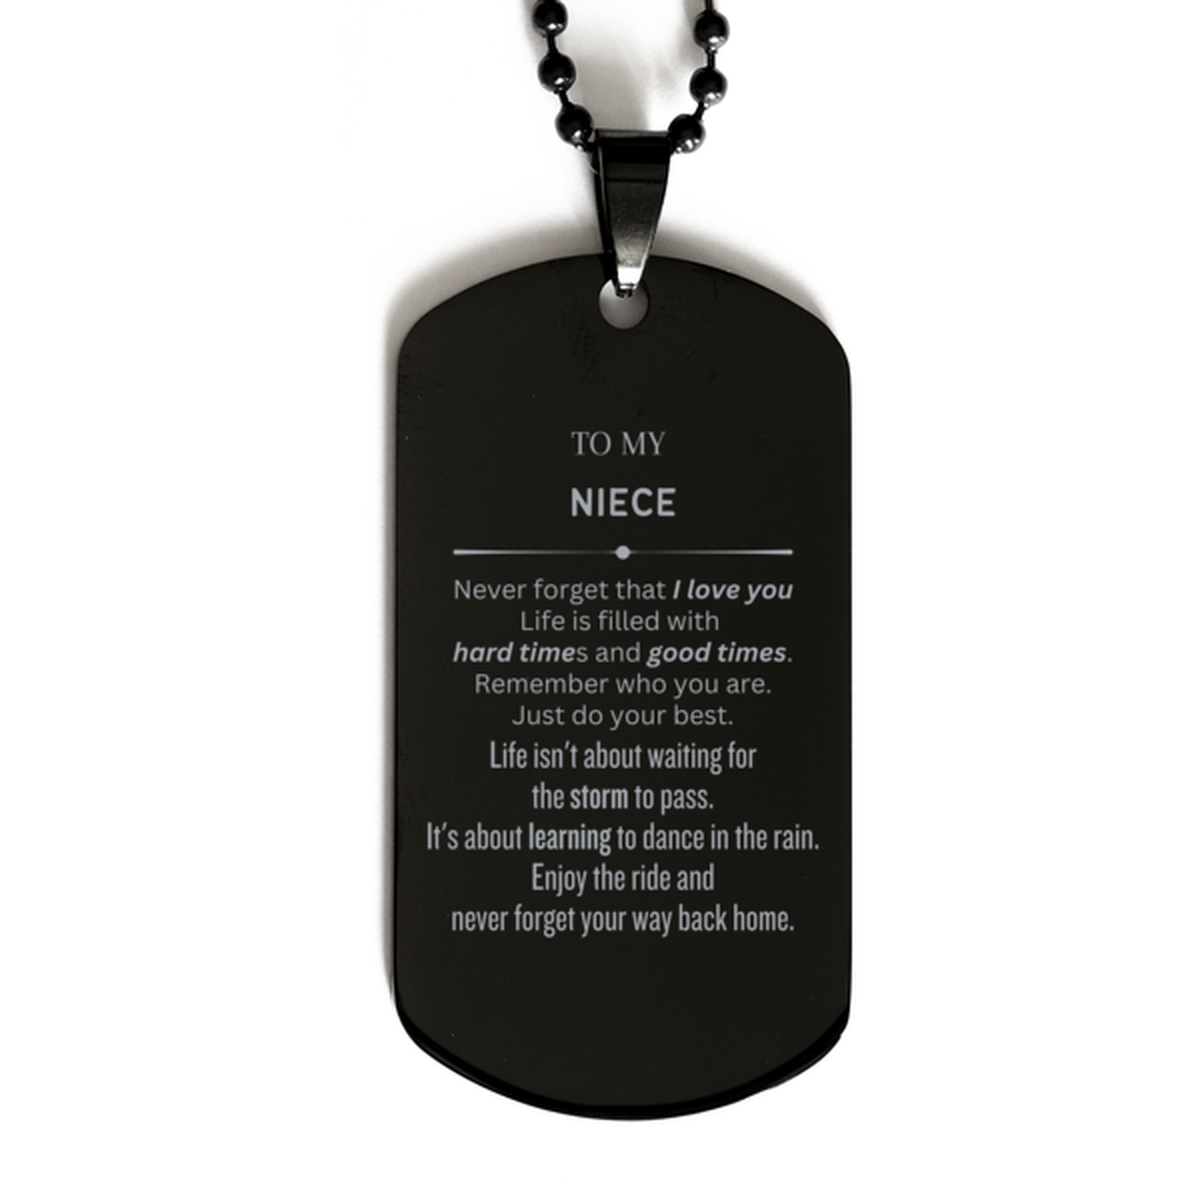 Christmas Niece Black Dog Tag Gifts, To My Niece Birthday Thank You Gifts For Niece, Graduation Unique Gifts For Niece To My Niece Never forget that I love you life is filled with hard times and good times. Remember who you are. Just do your best